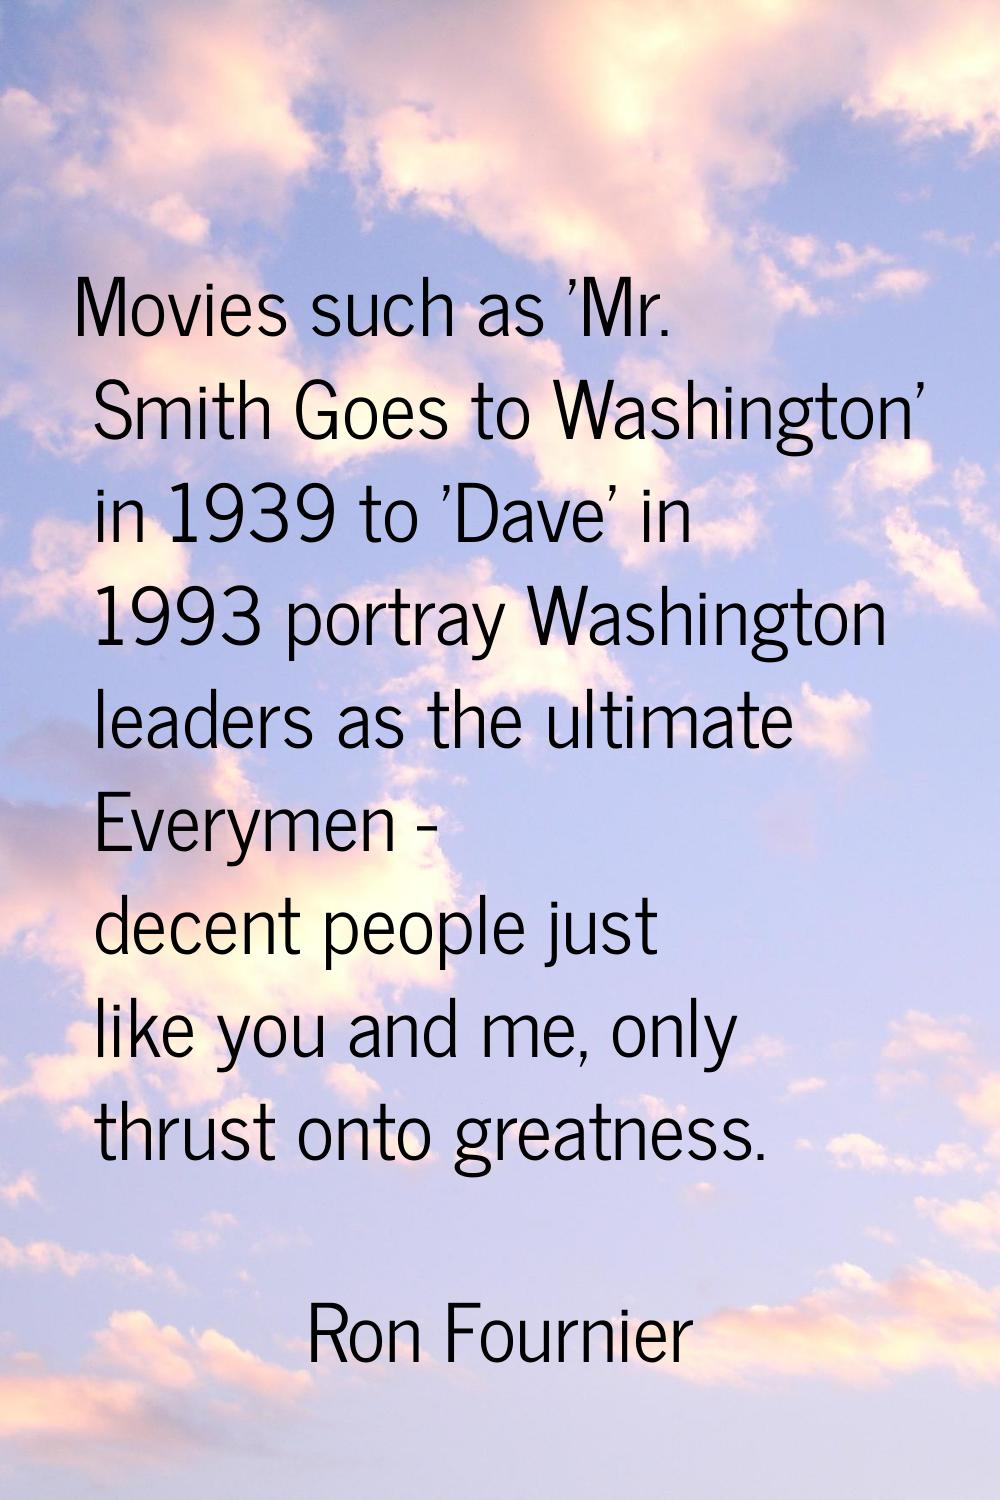 Movies such as 'Mr. Smith Goes to Washington' in 1939 to 'Dave' in 1993 portray Washington leaders 